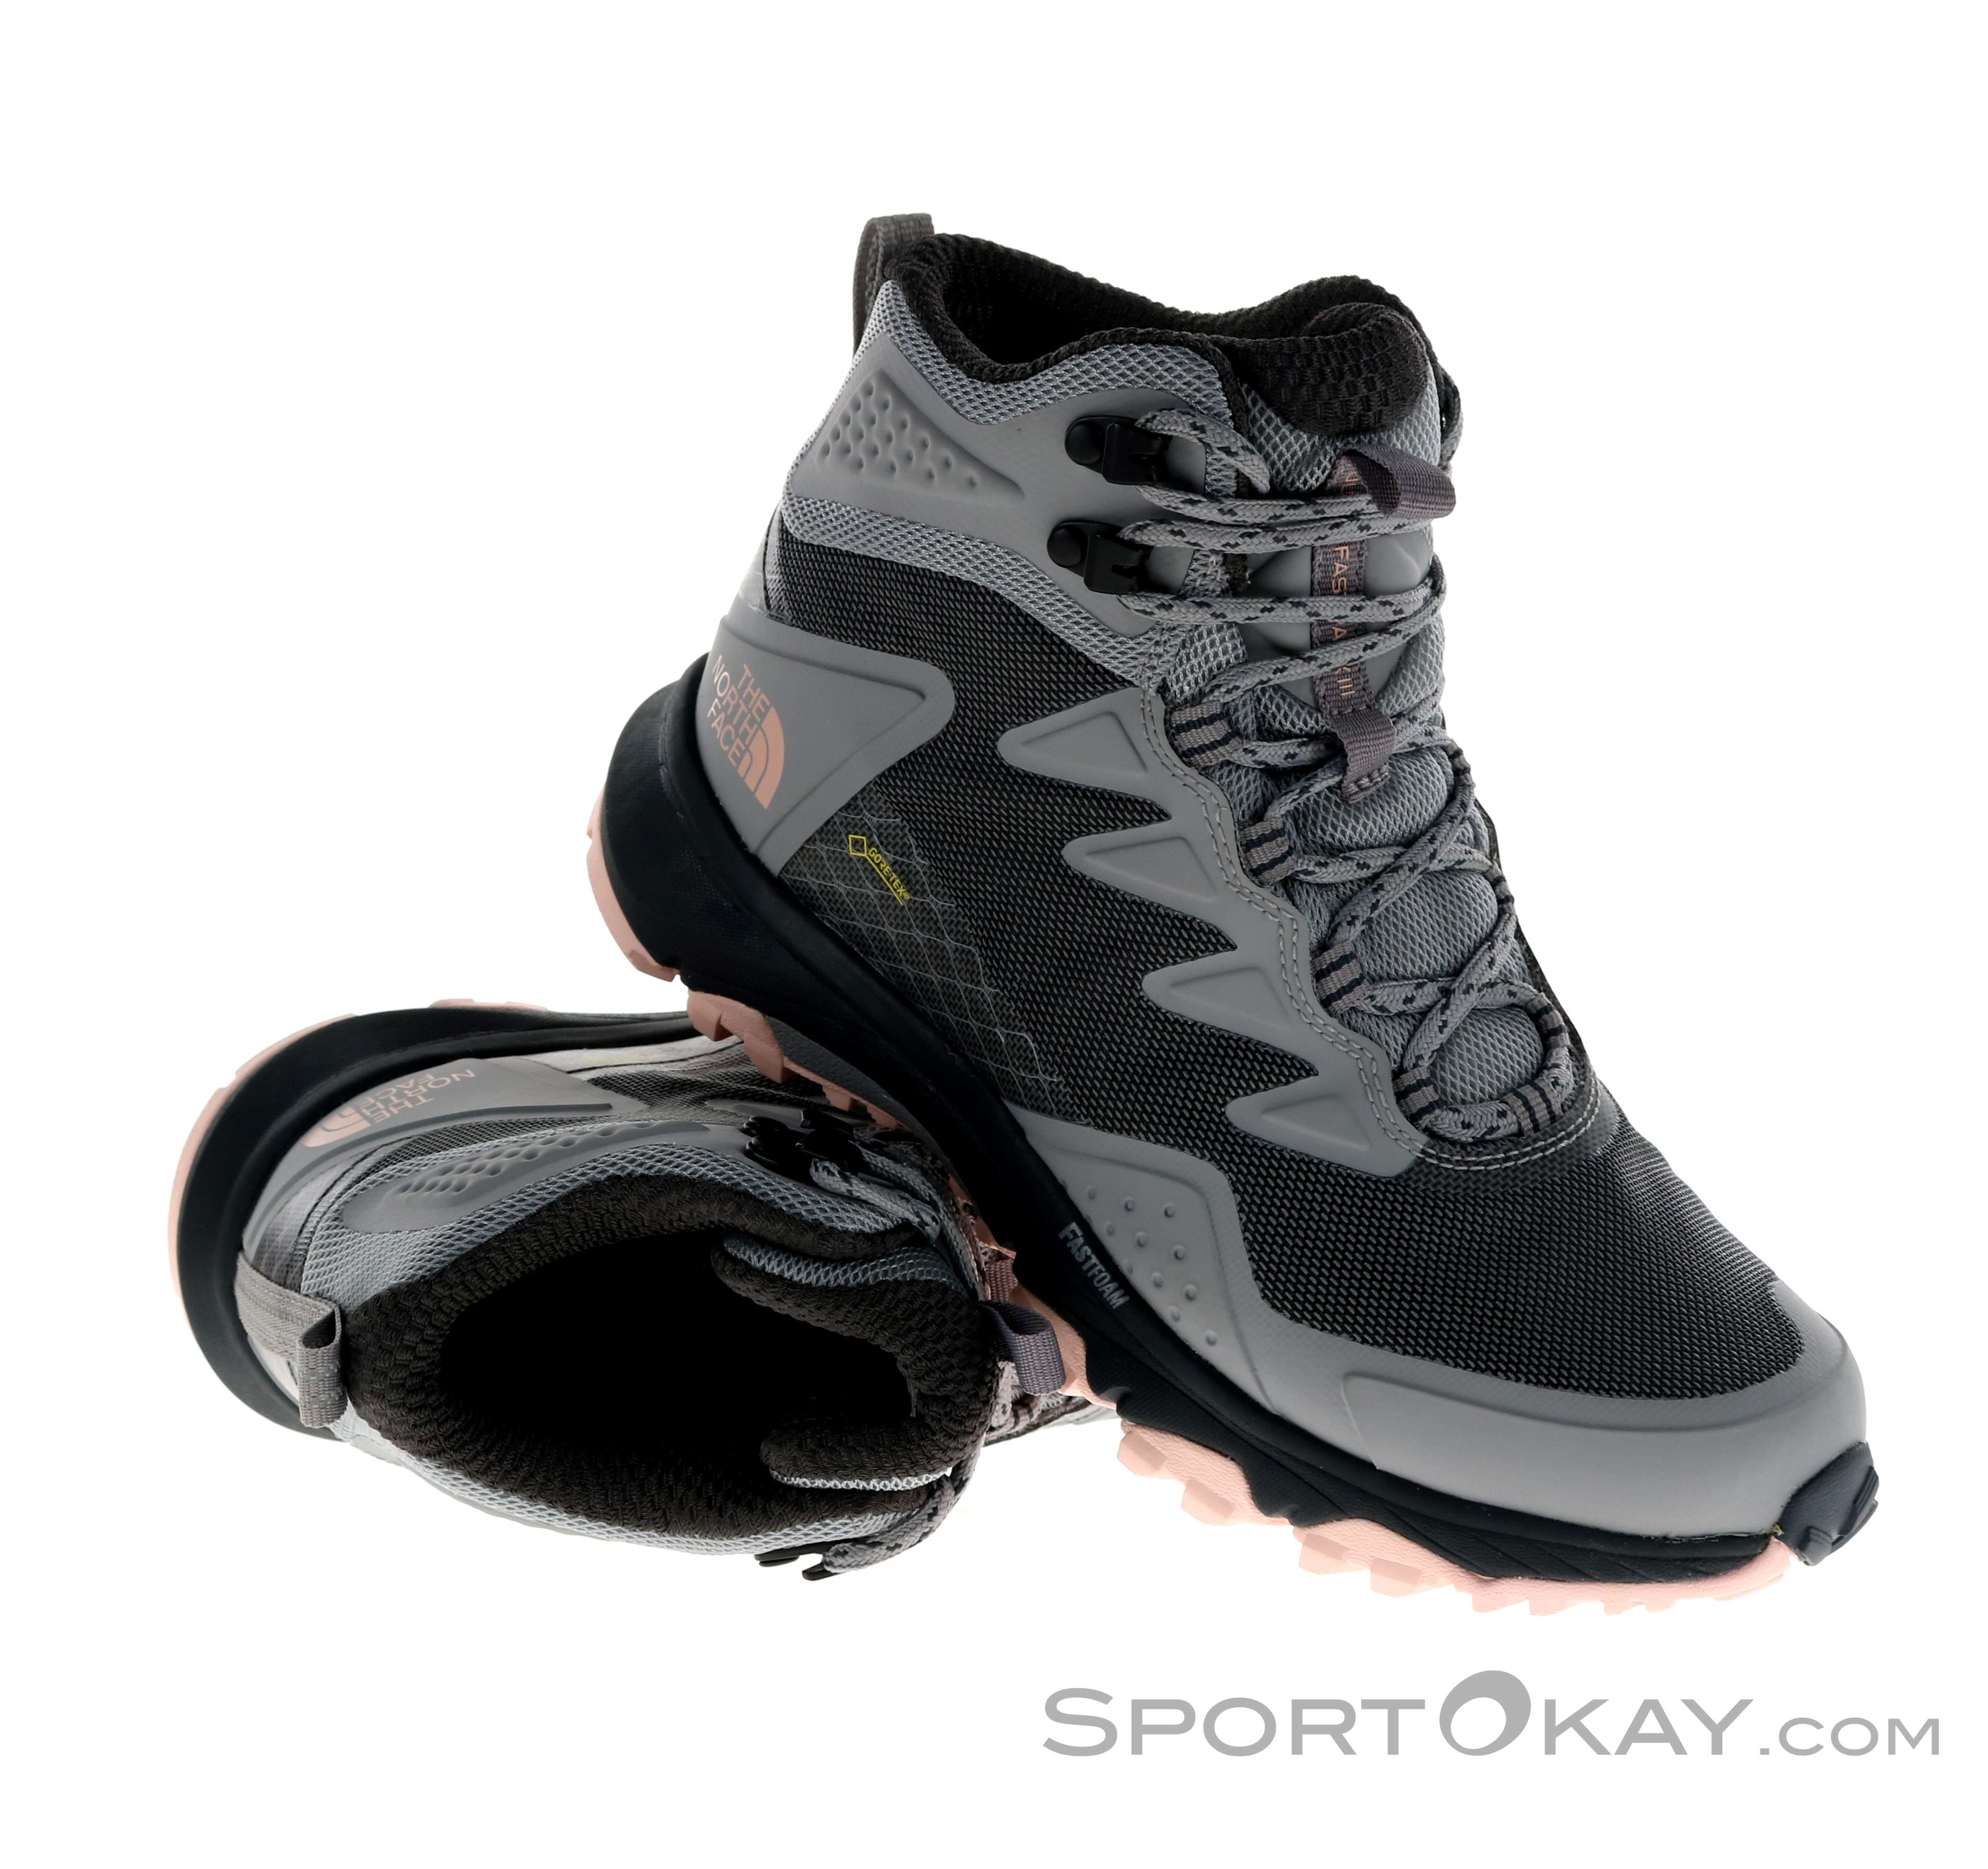 the north face ultra fastpack iii mid gtx hiking boots